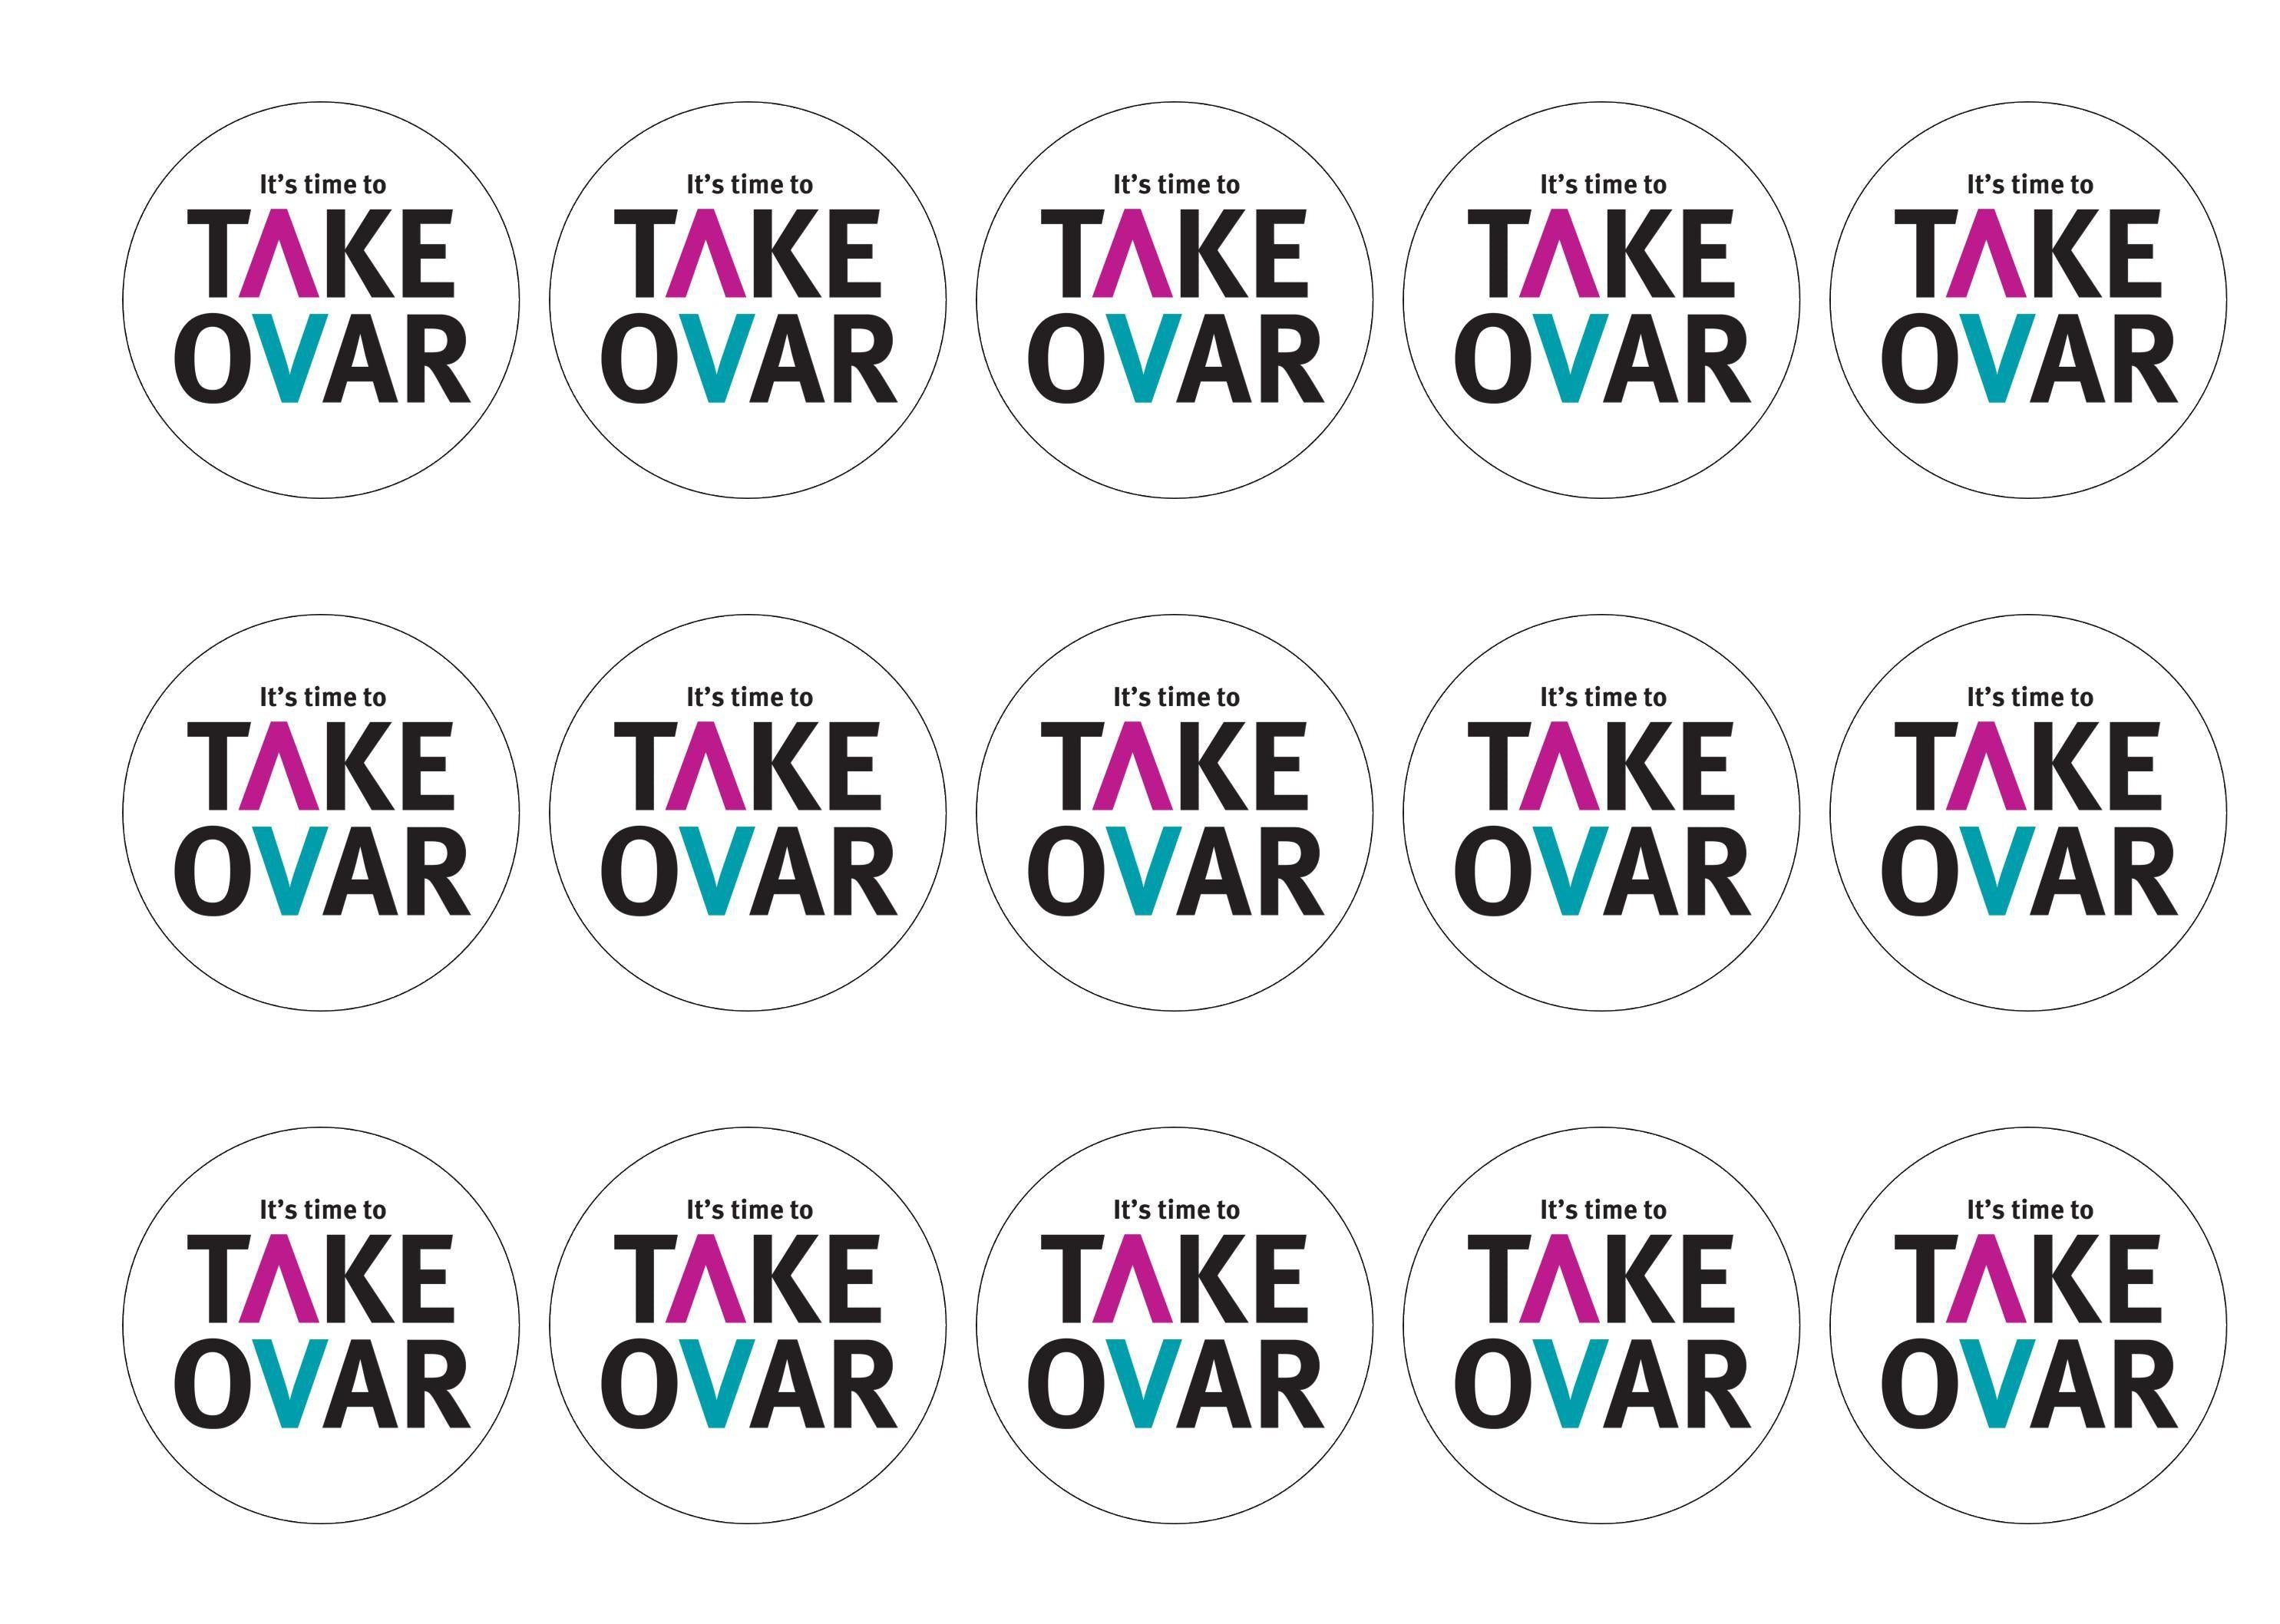 15 printed cupcake toppers for the charity Target Ovarian Cancer - Take Ovar